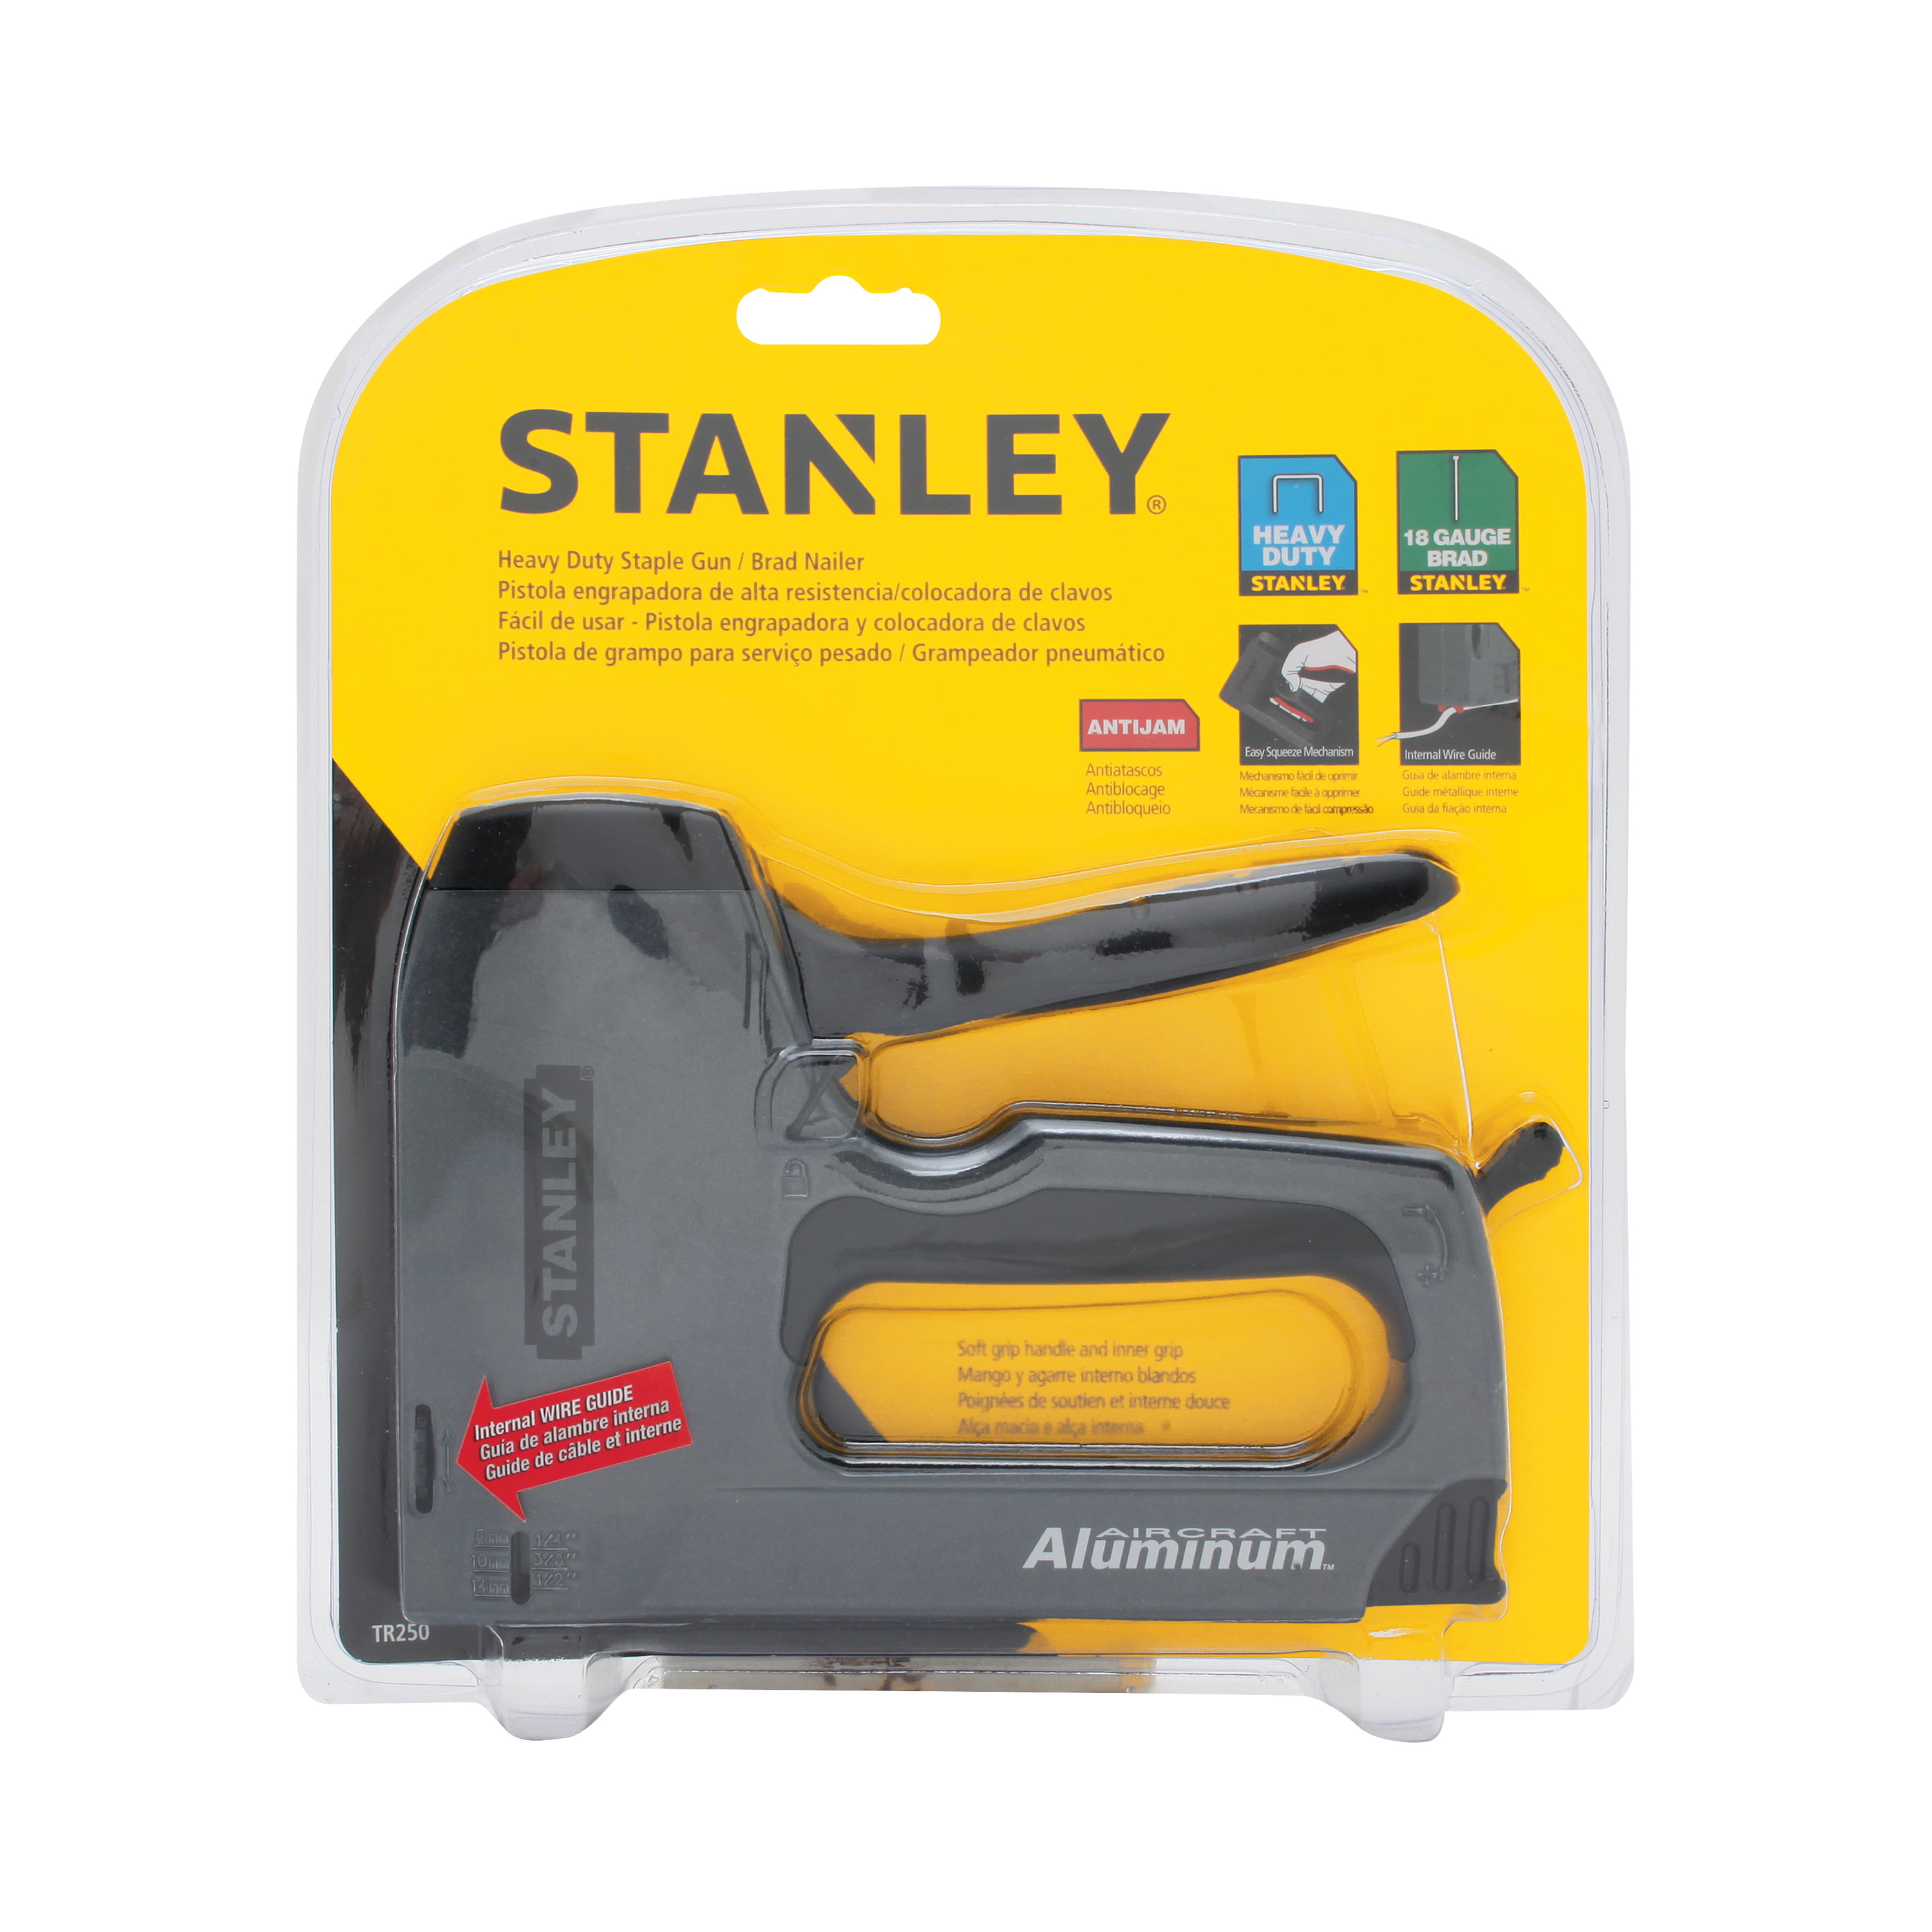 Bostitch 2-in-1 Electric Staple and Nail Gun - 8-in Cord BTE550Z |  Réno-Dépôt